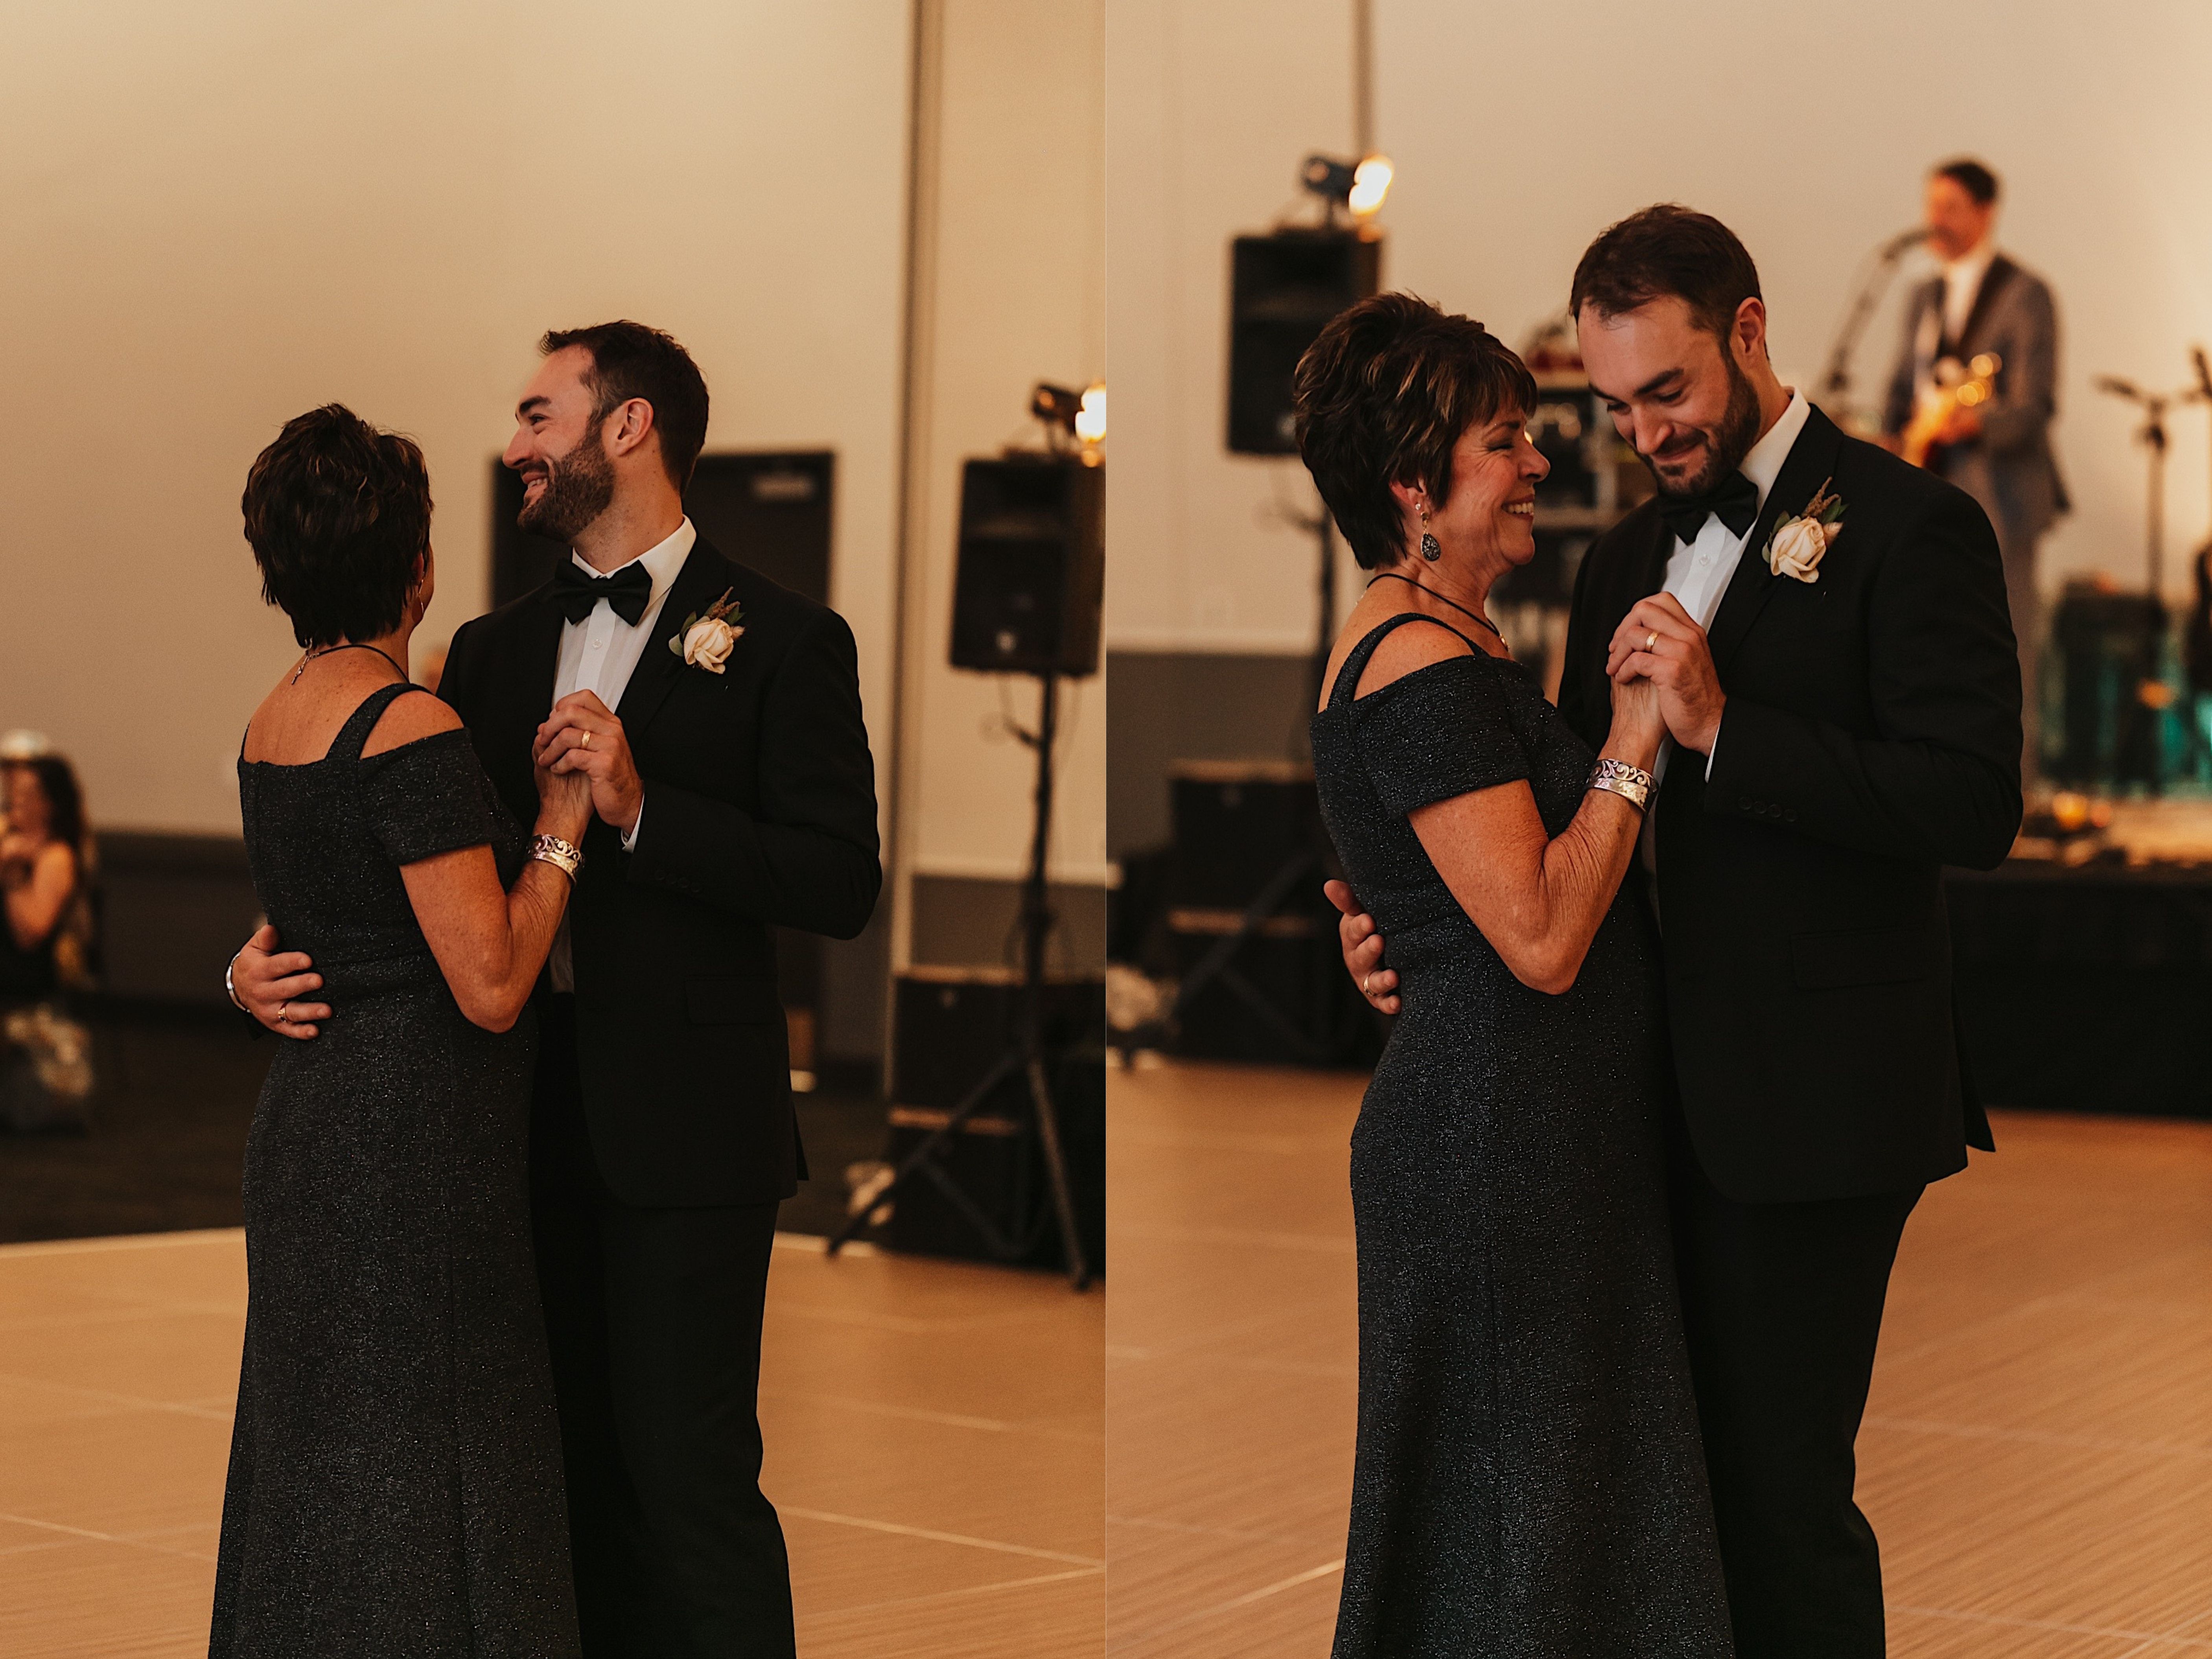 2 side by side photos of a groom dancing with his mother during his wedding reception